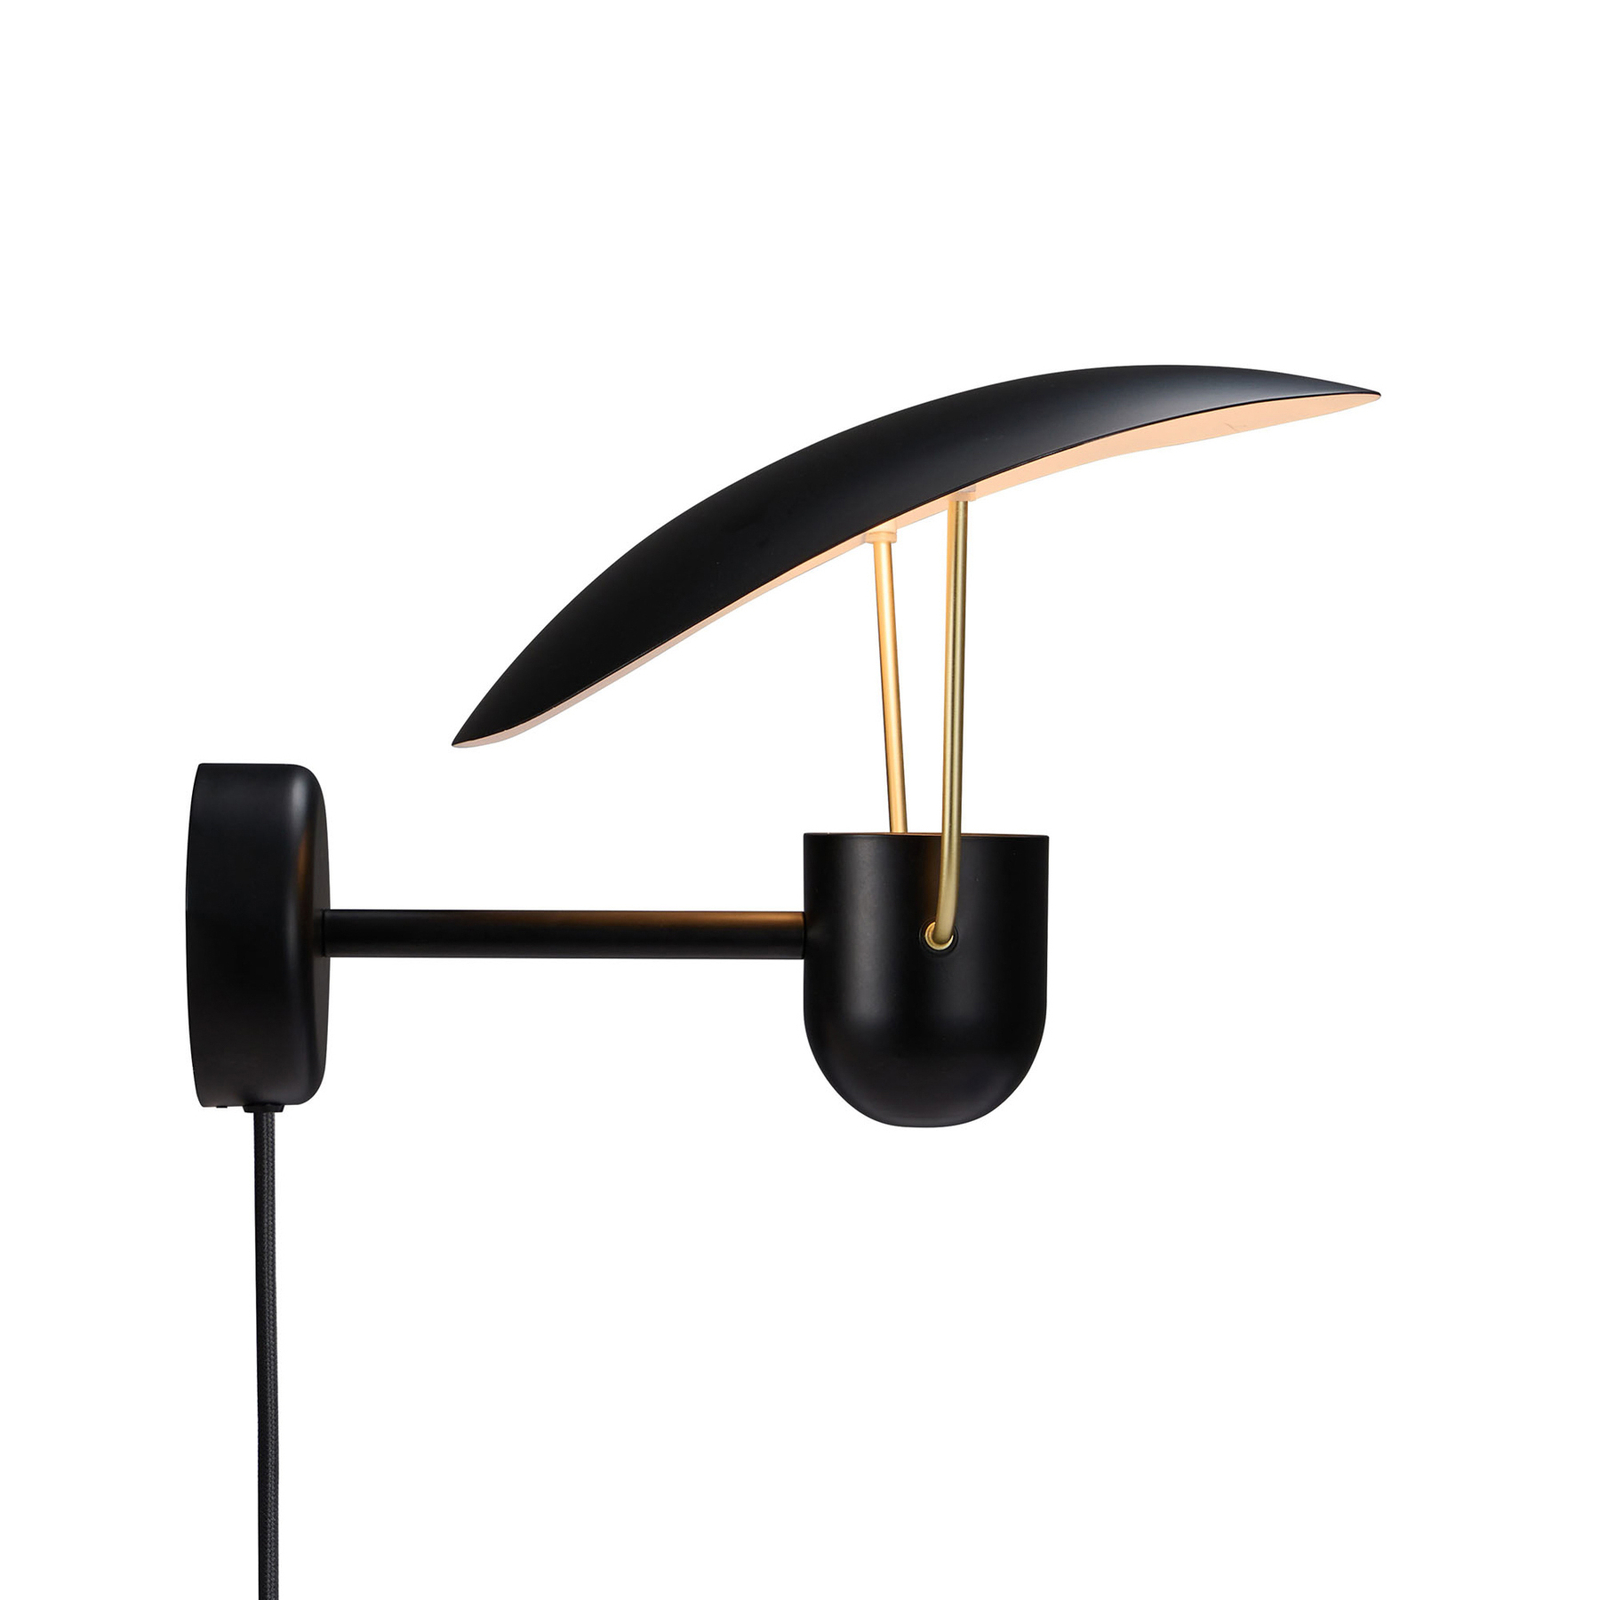 Fabiola wall light with a switch, black